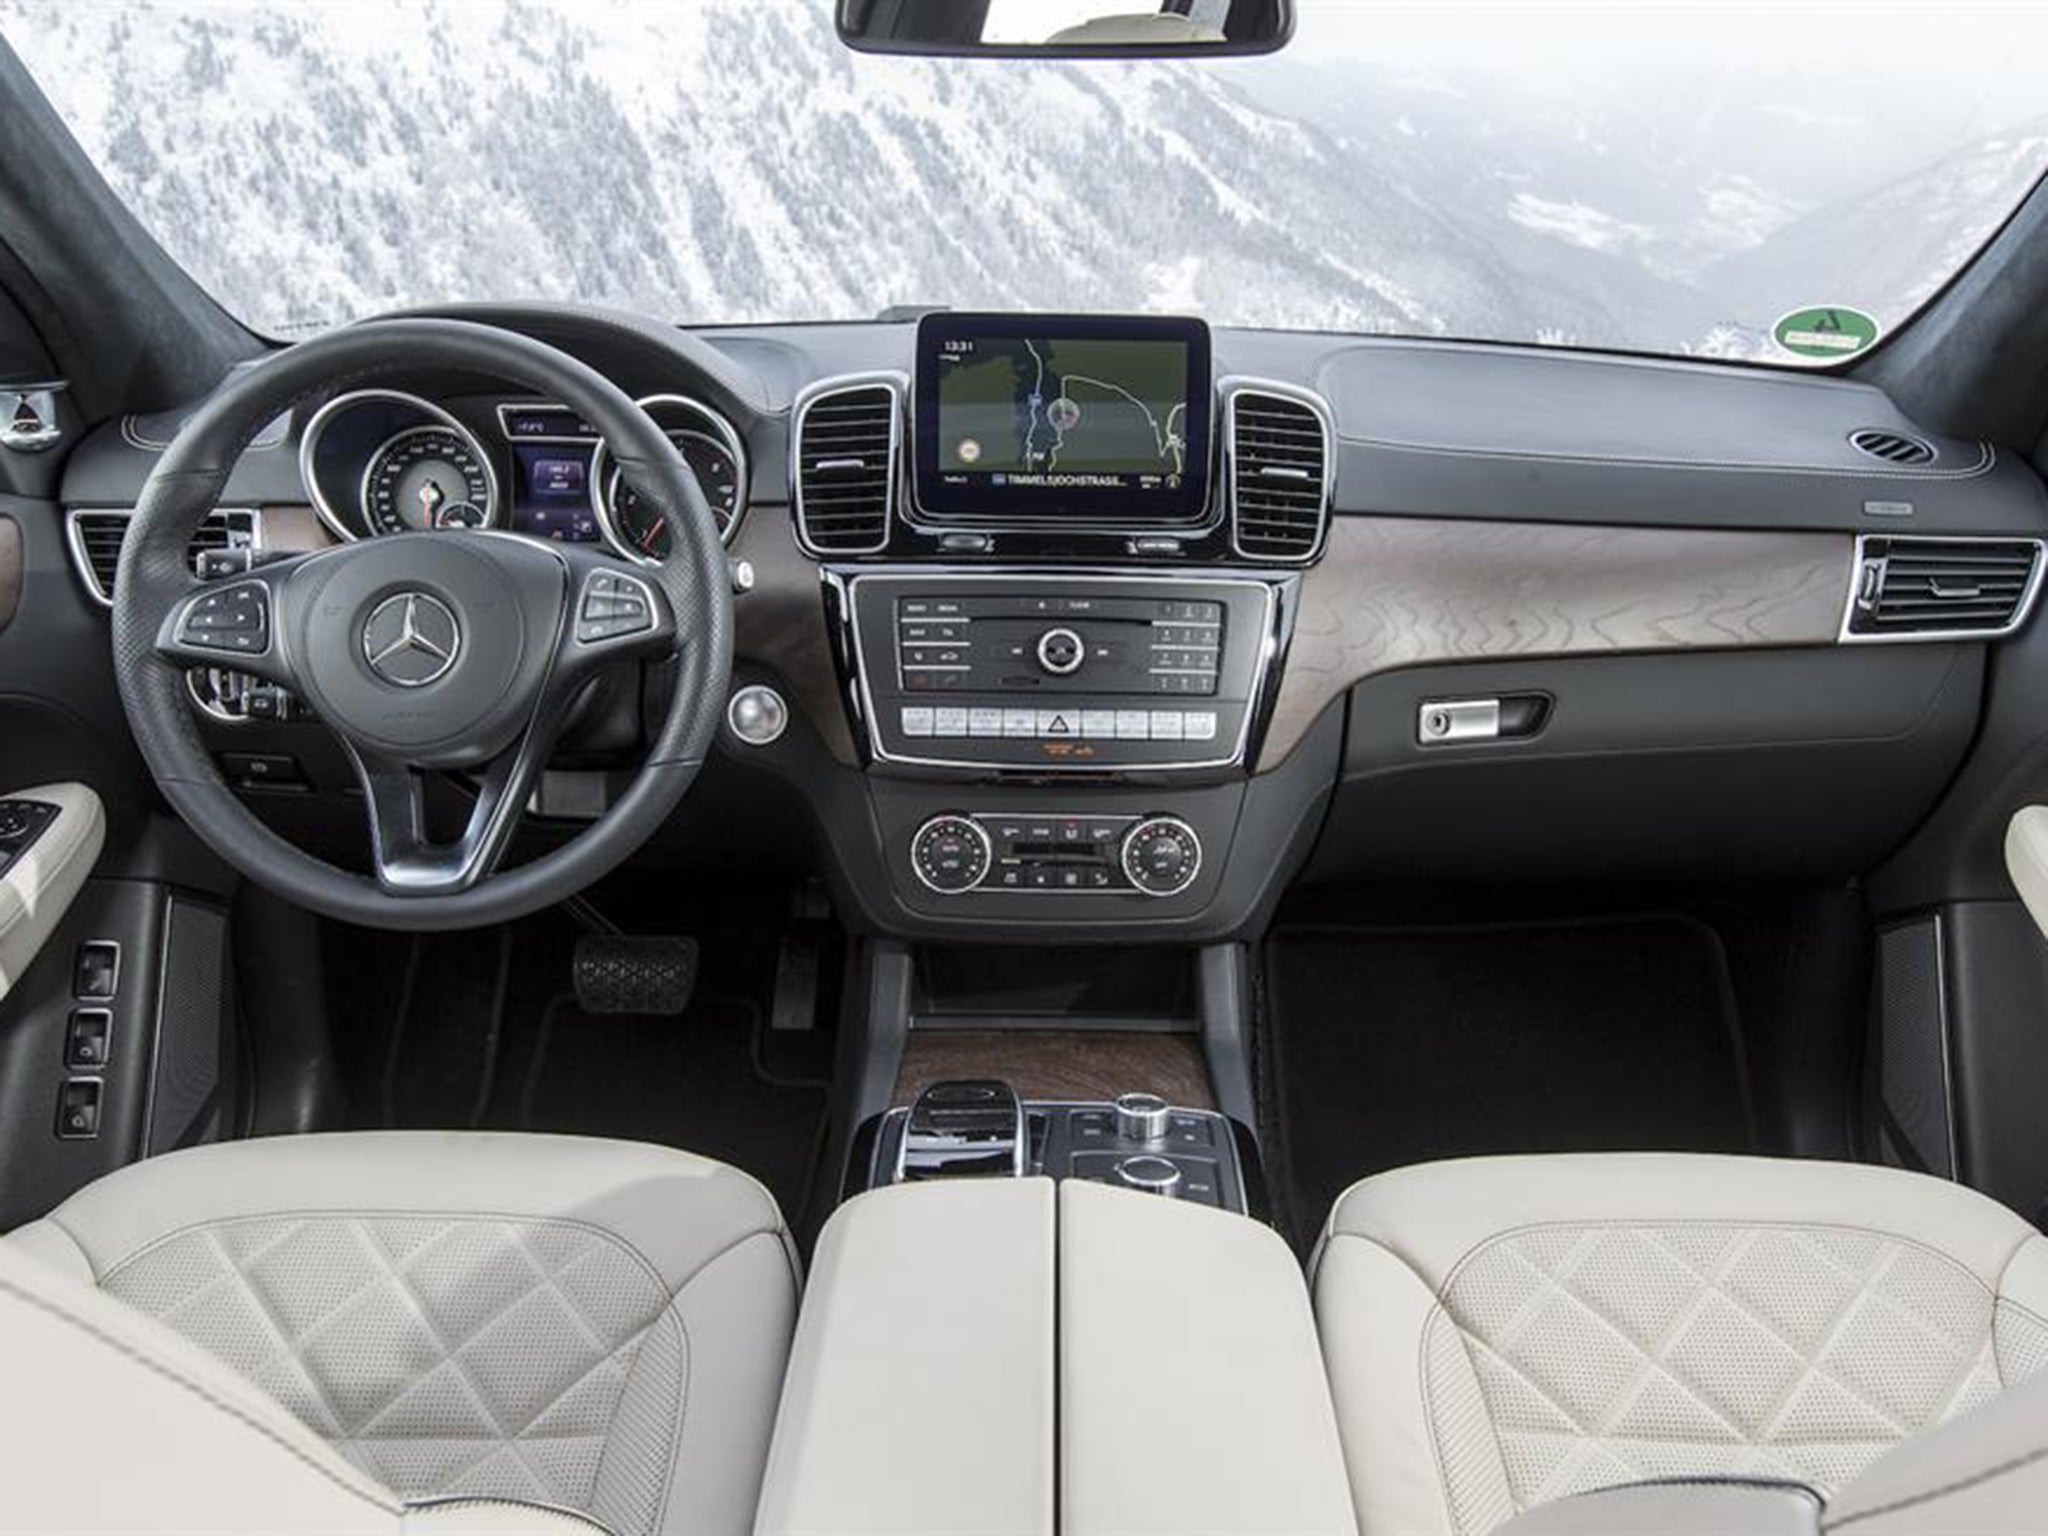 Refinement in the spacious and high-spec cabin is certainly impressive